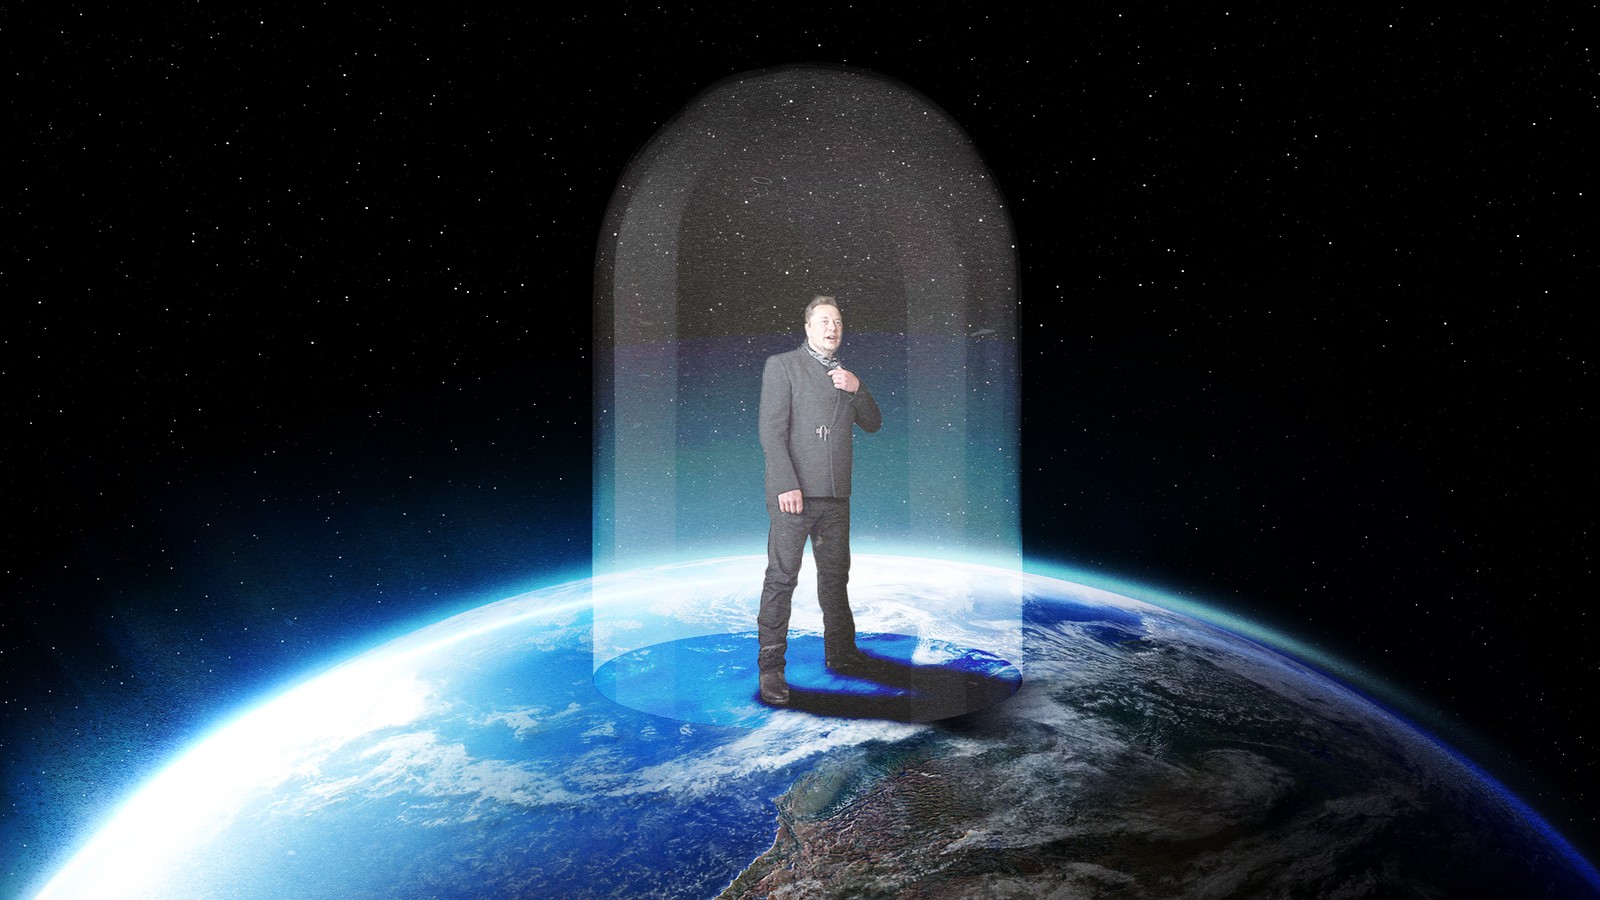 Why hasn’t Elon Musk Been to Space?